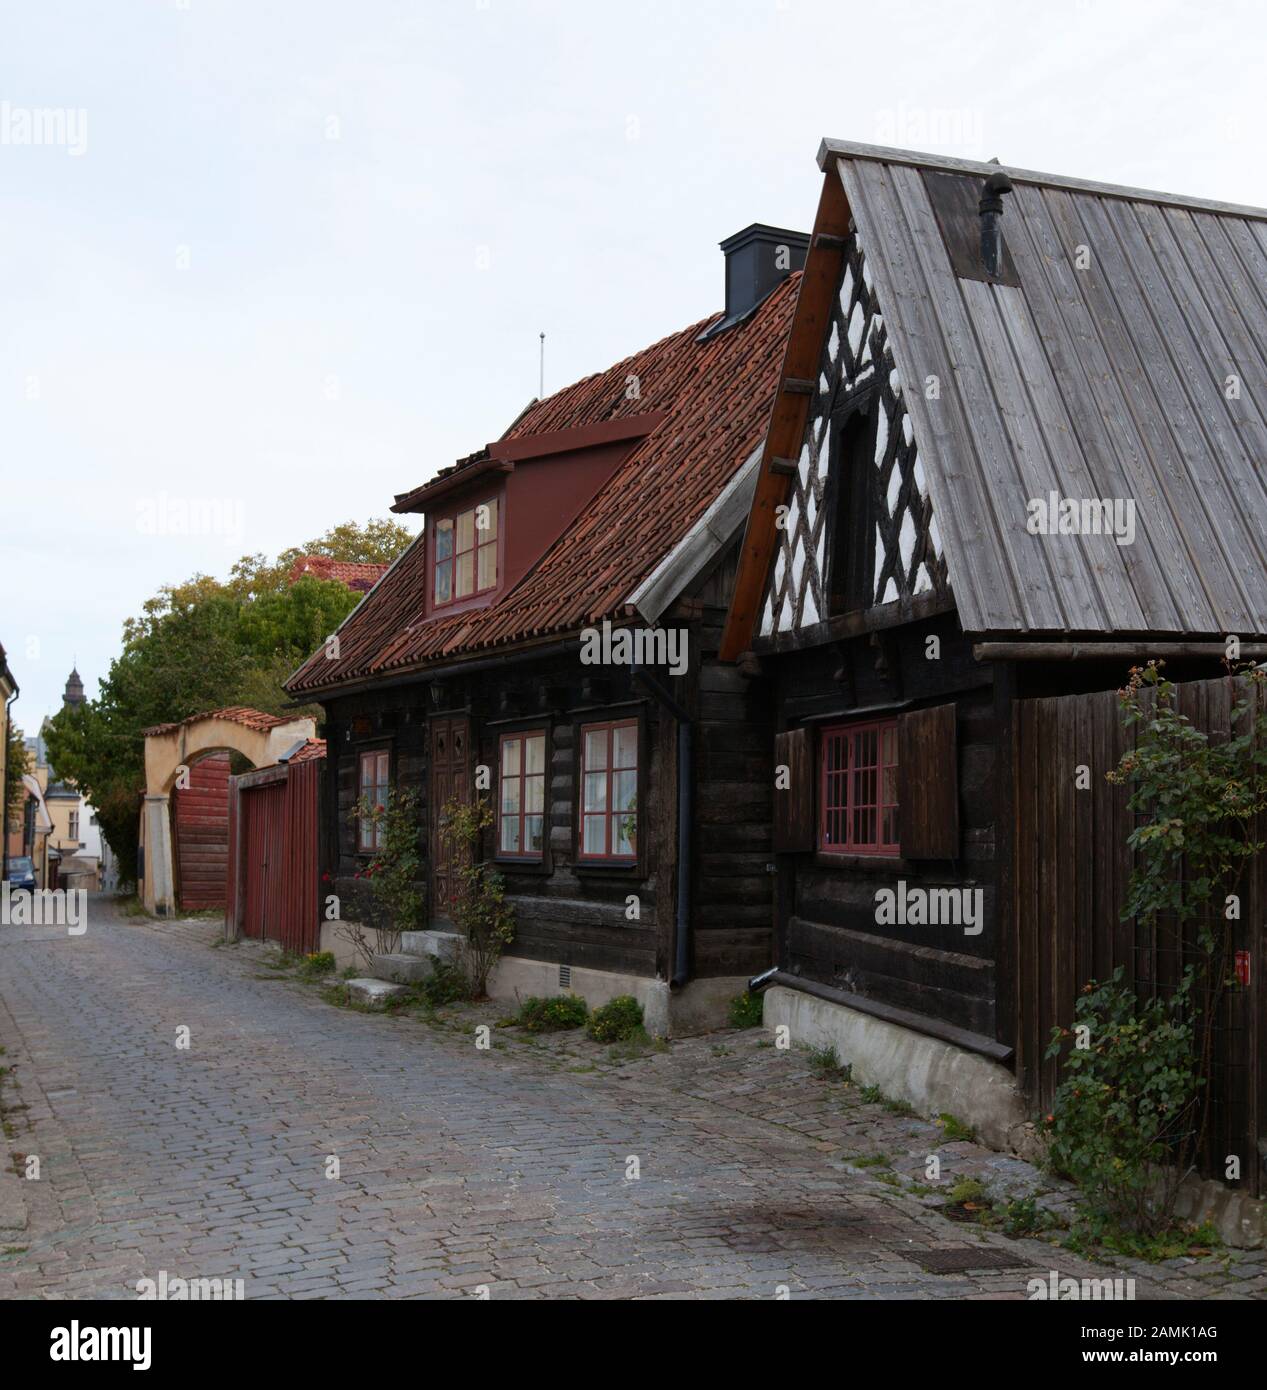 VISBY, SWEDEN ON OCTOBER 13, 2019. Street view of buildings. Old house, homes in the town. Editorial use. Stock Photo